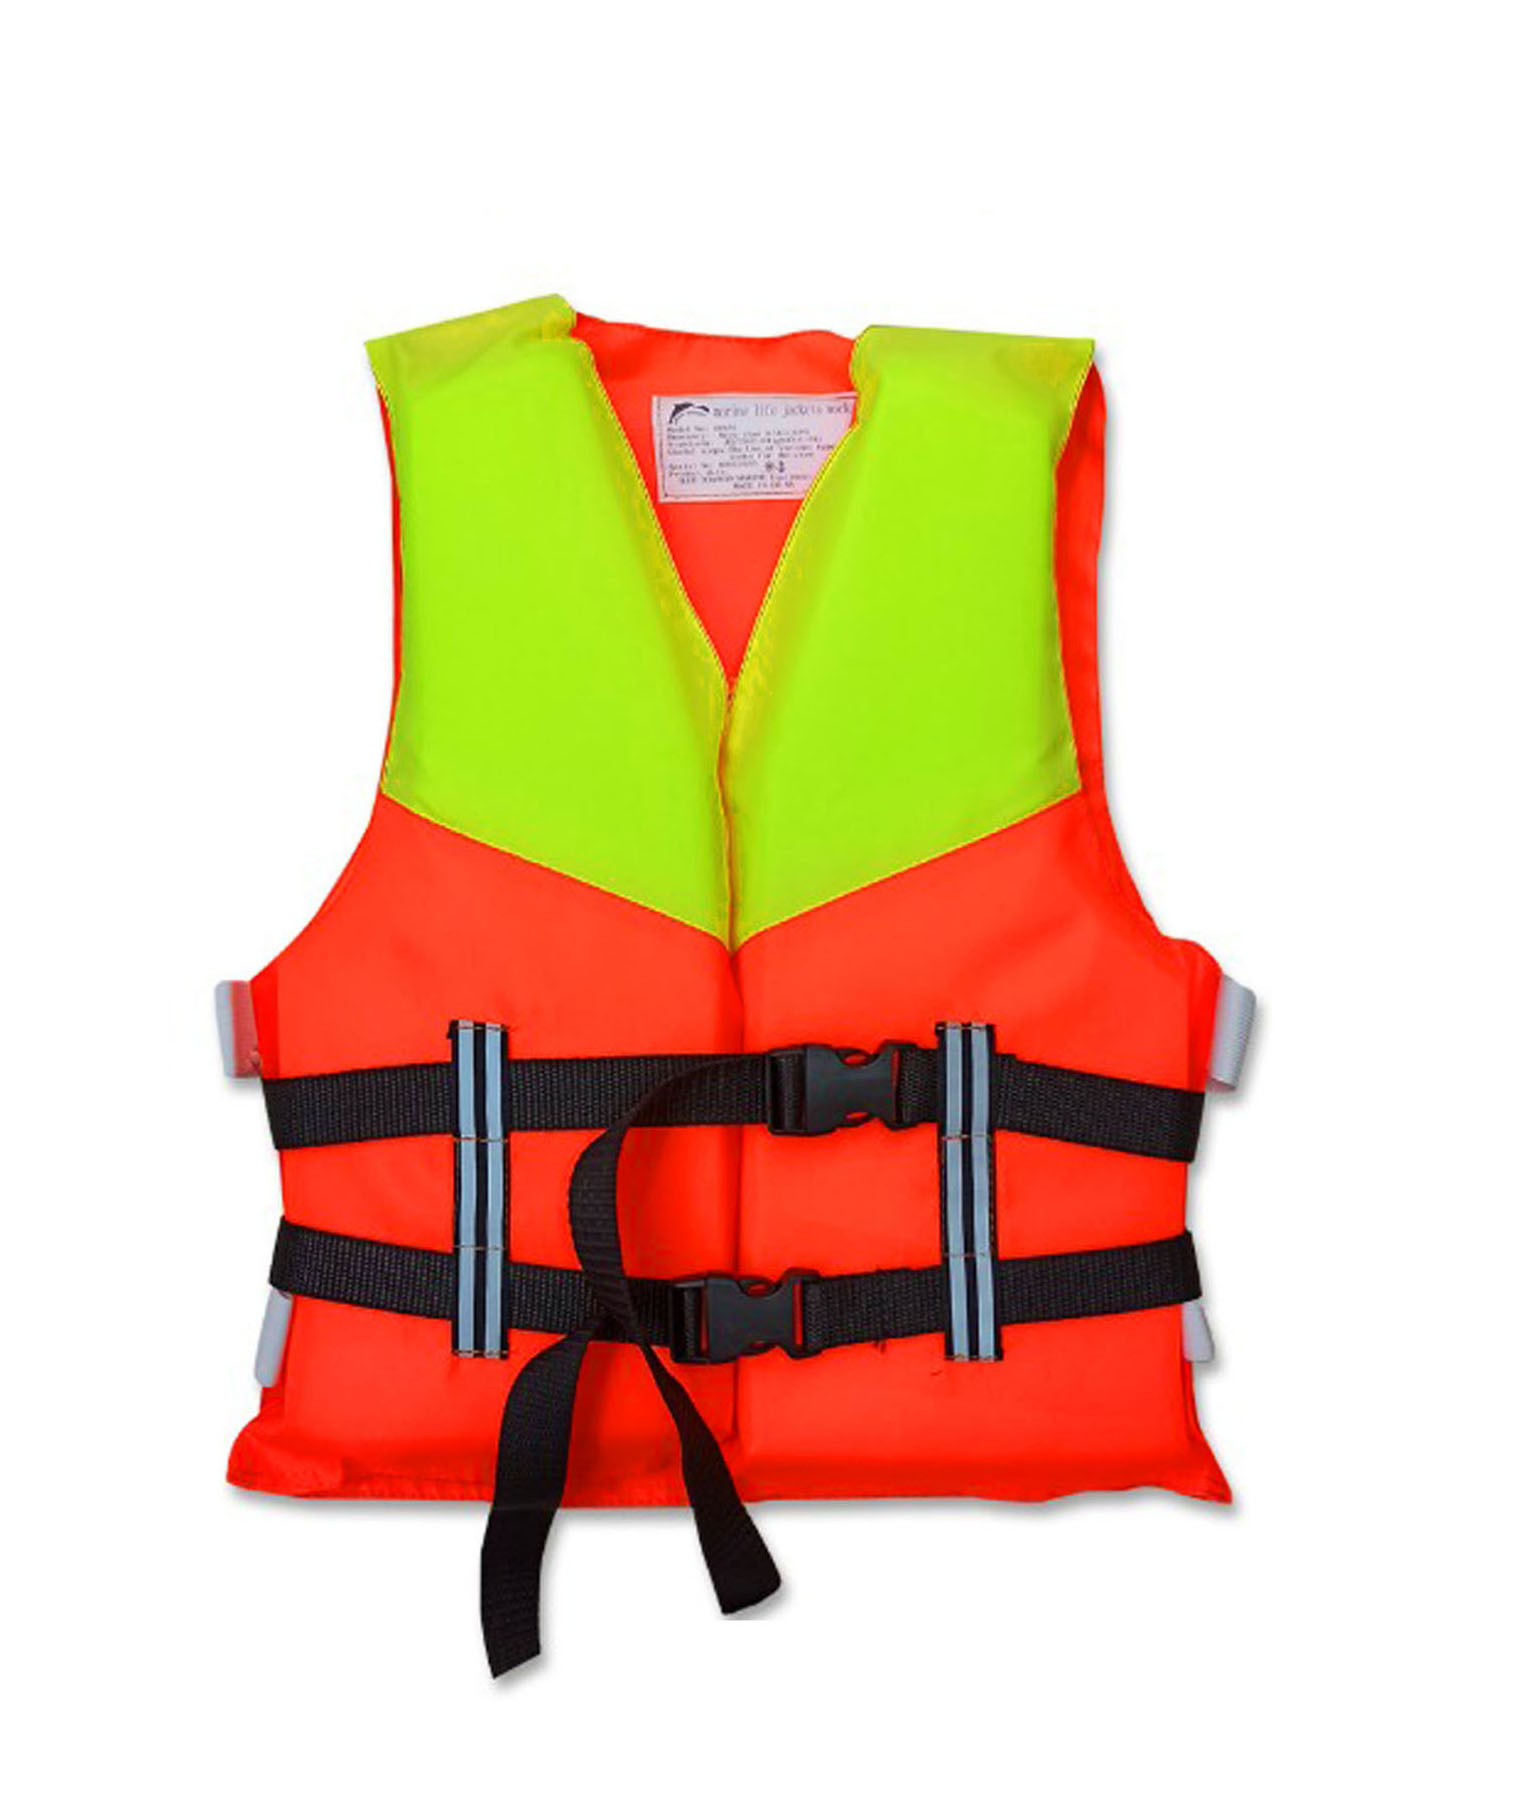 LIFE JACKET FOR KIDS - Life Jacket Dual Colors, Exclusive Life Jacket ...